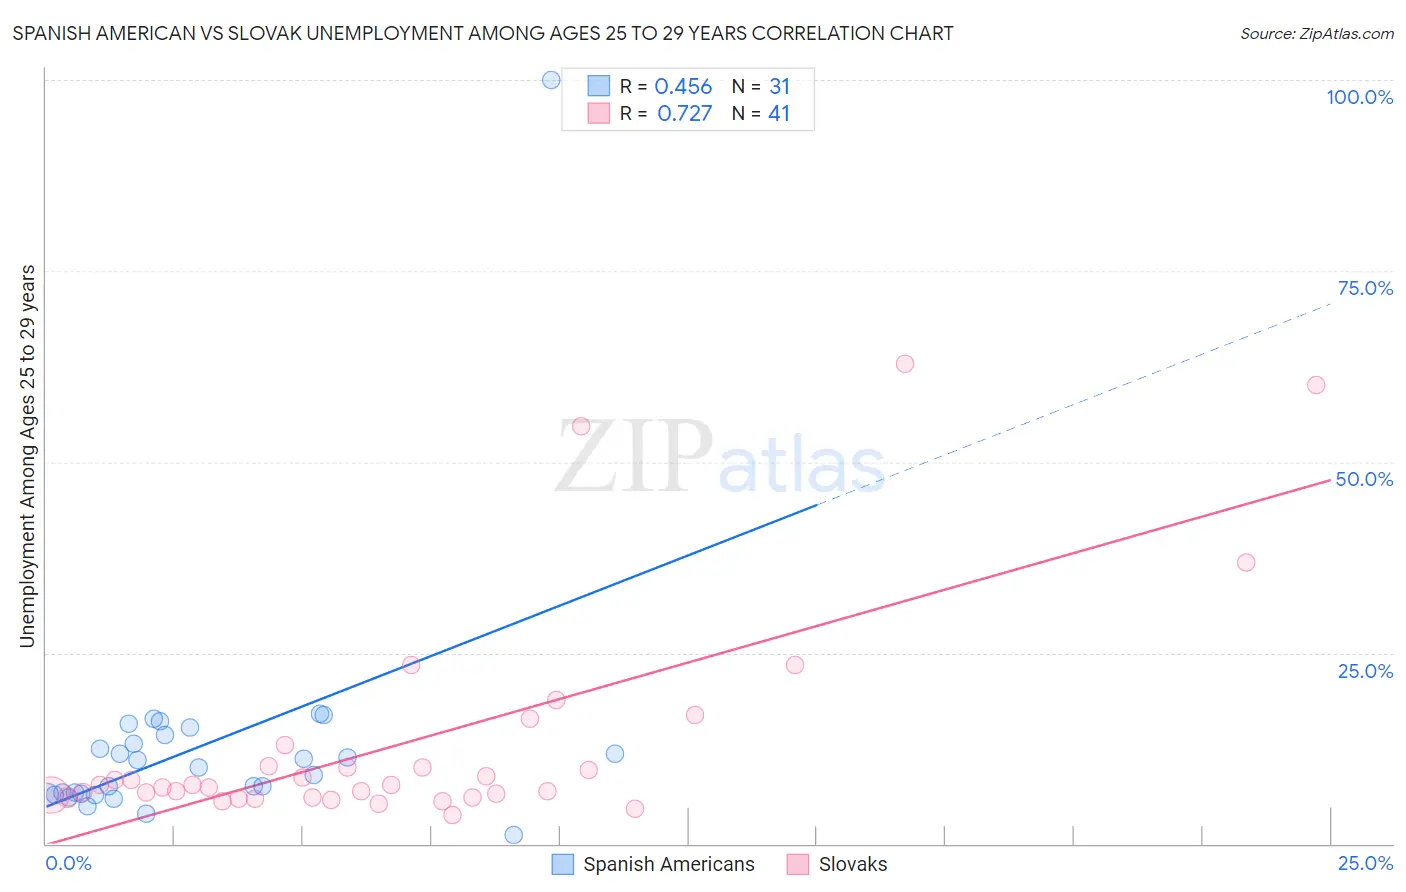 Spanish American vs Slovak Unemployment Among Ages 25 to 29 years